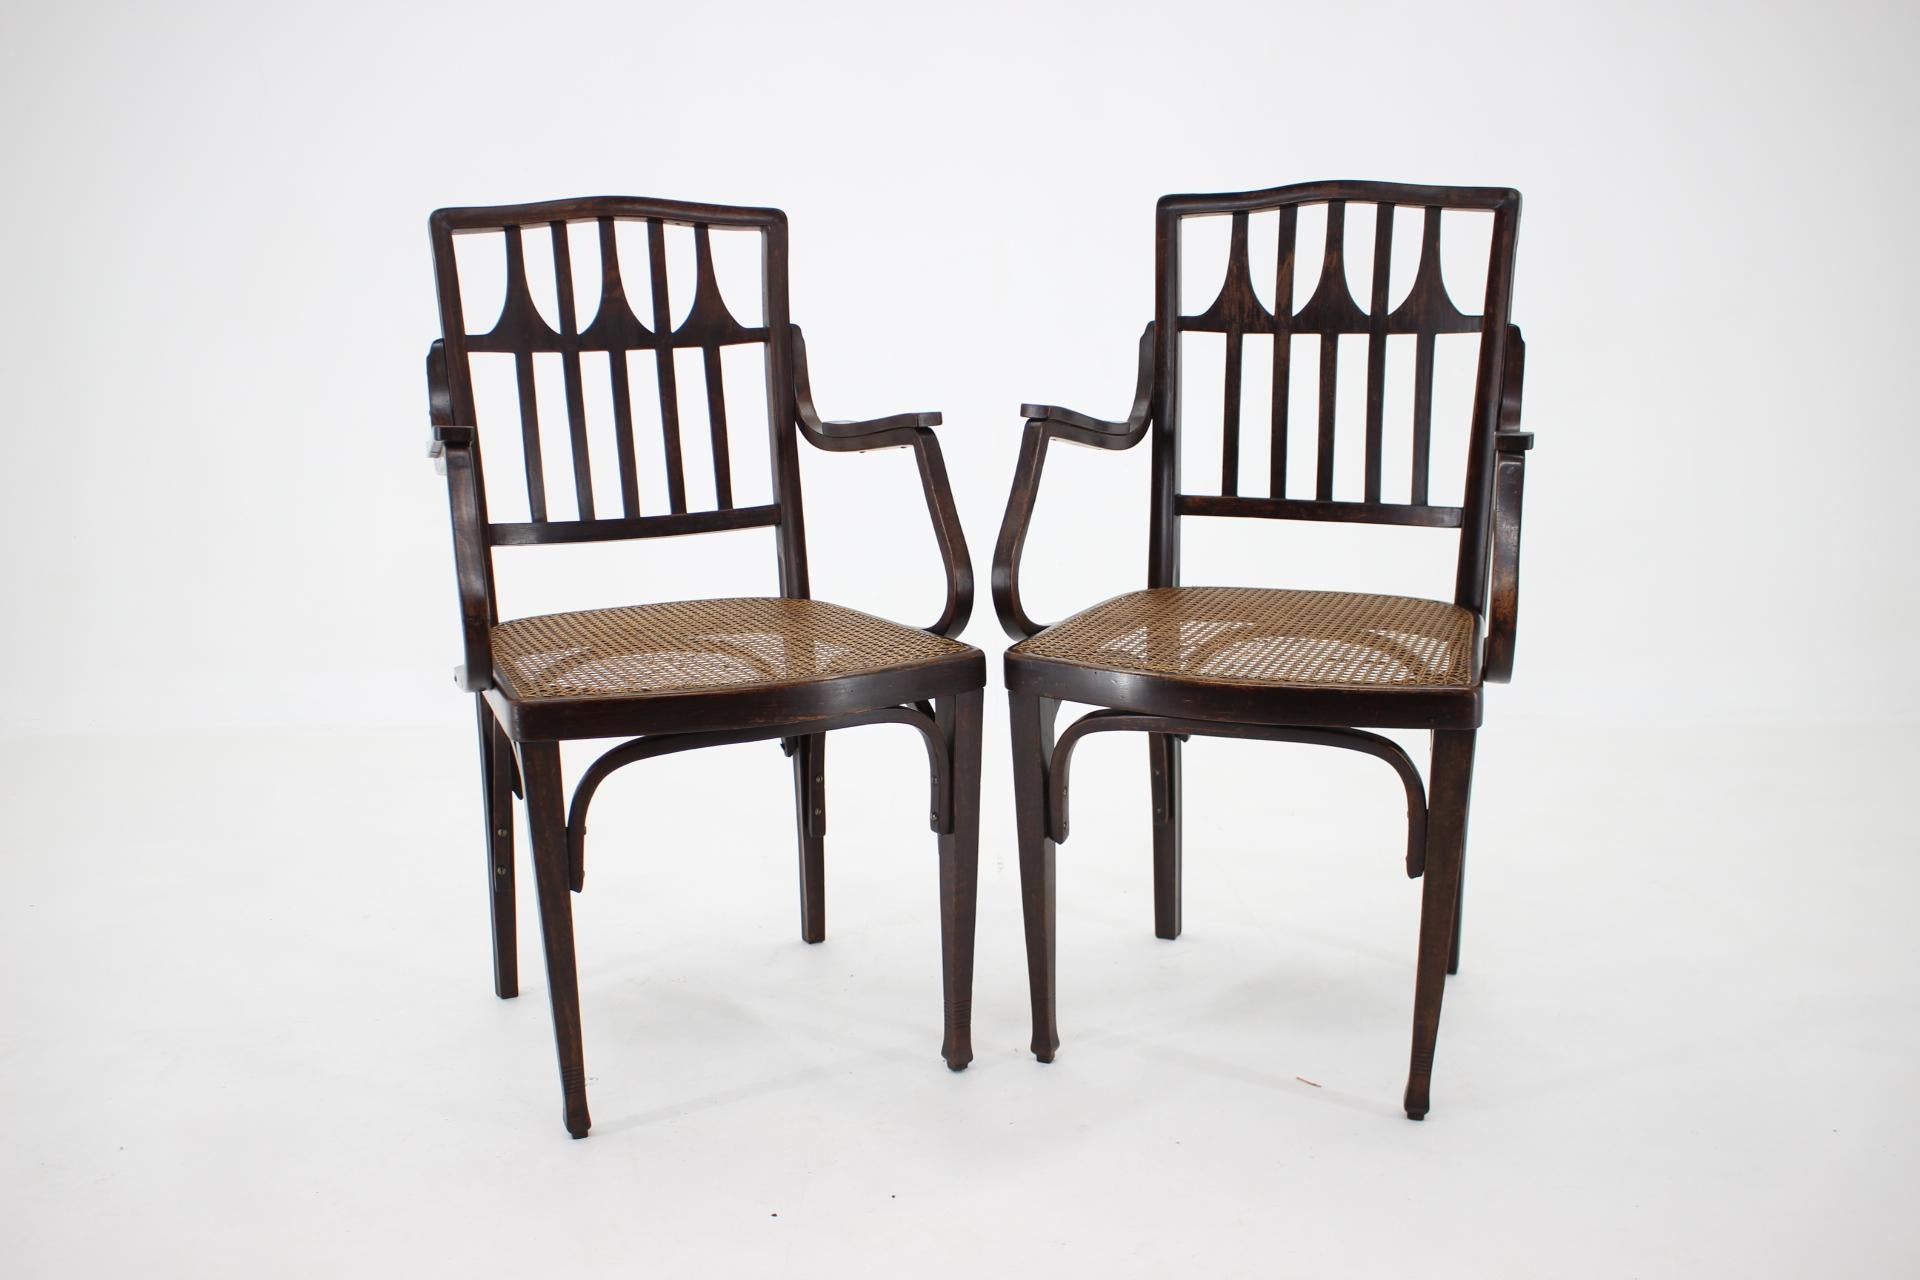 1900s Koloman Moser Pair of Armchairs for J & J Kohn No. 327  In Good Condition For Sale In Praha, CZ